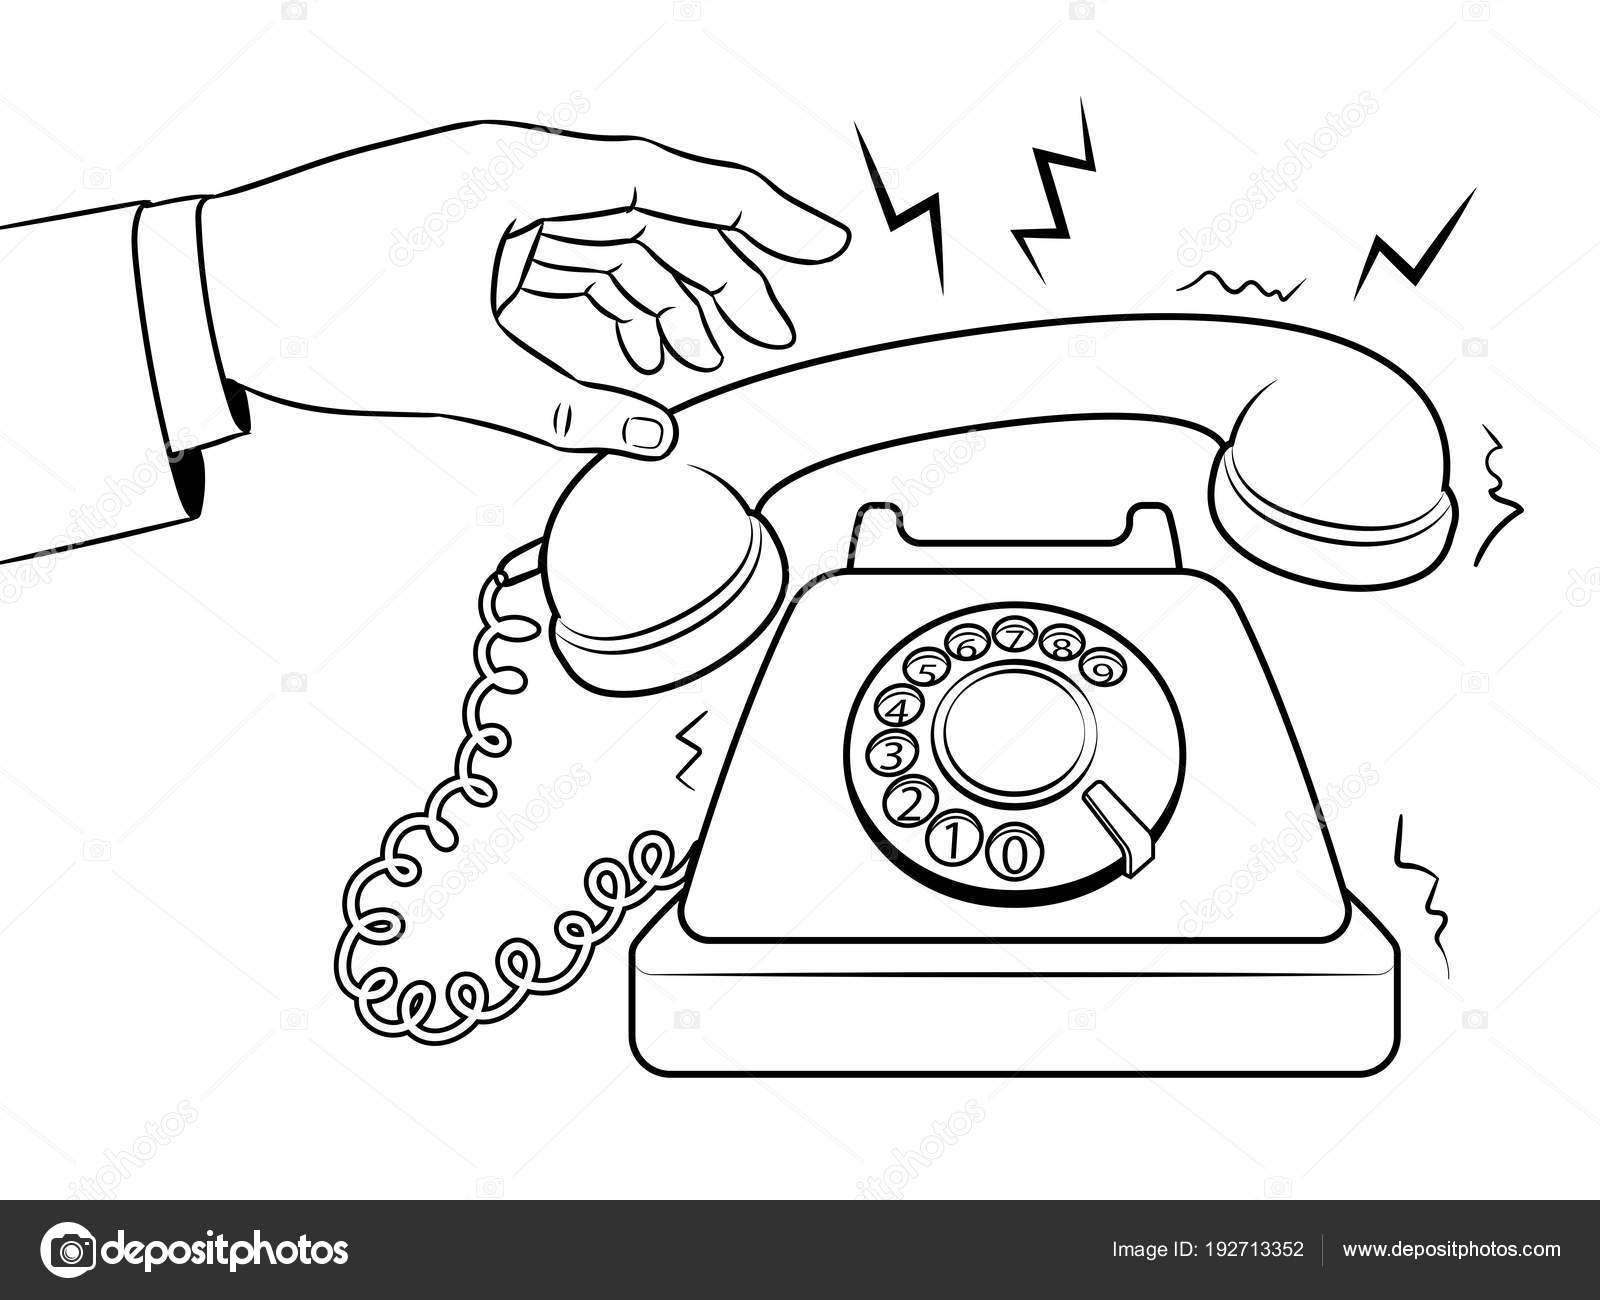 Old phone coloring book vector illustration stock vector by alexanderpokusay